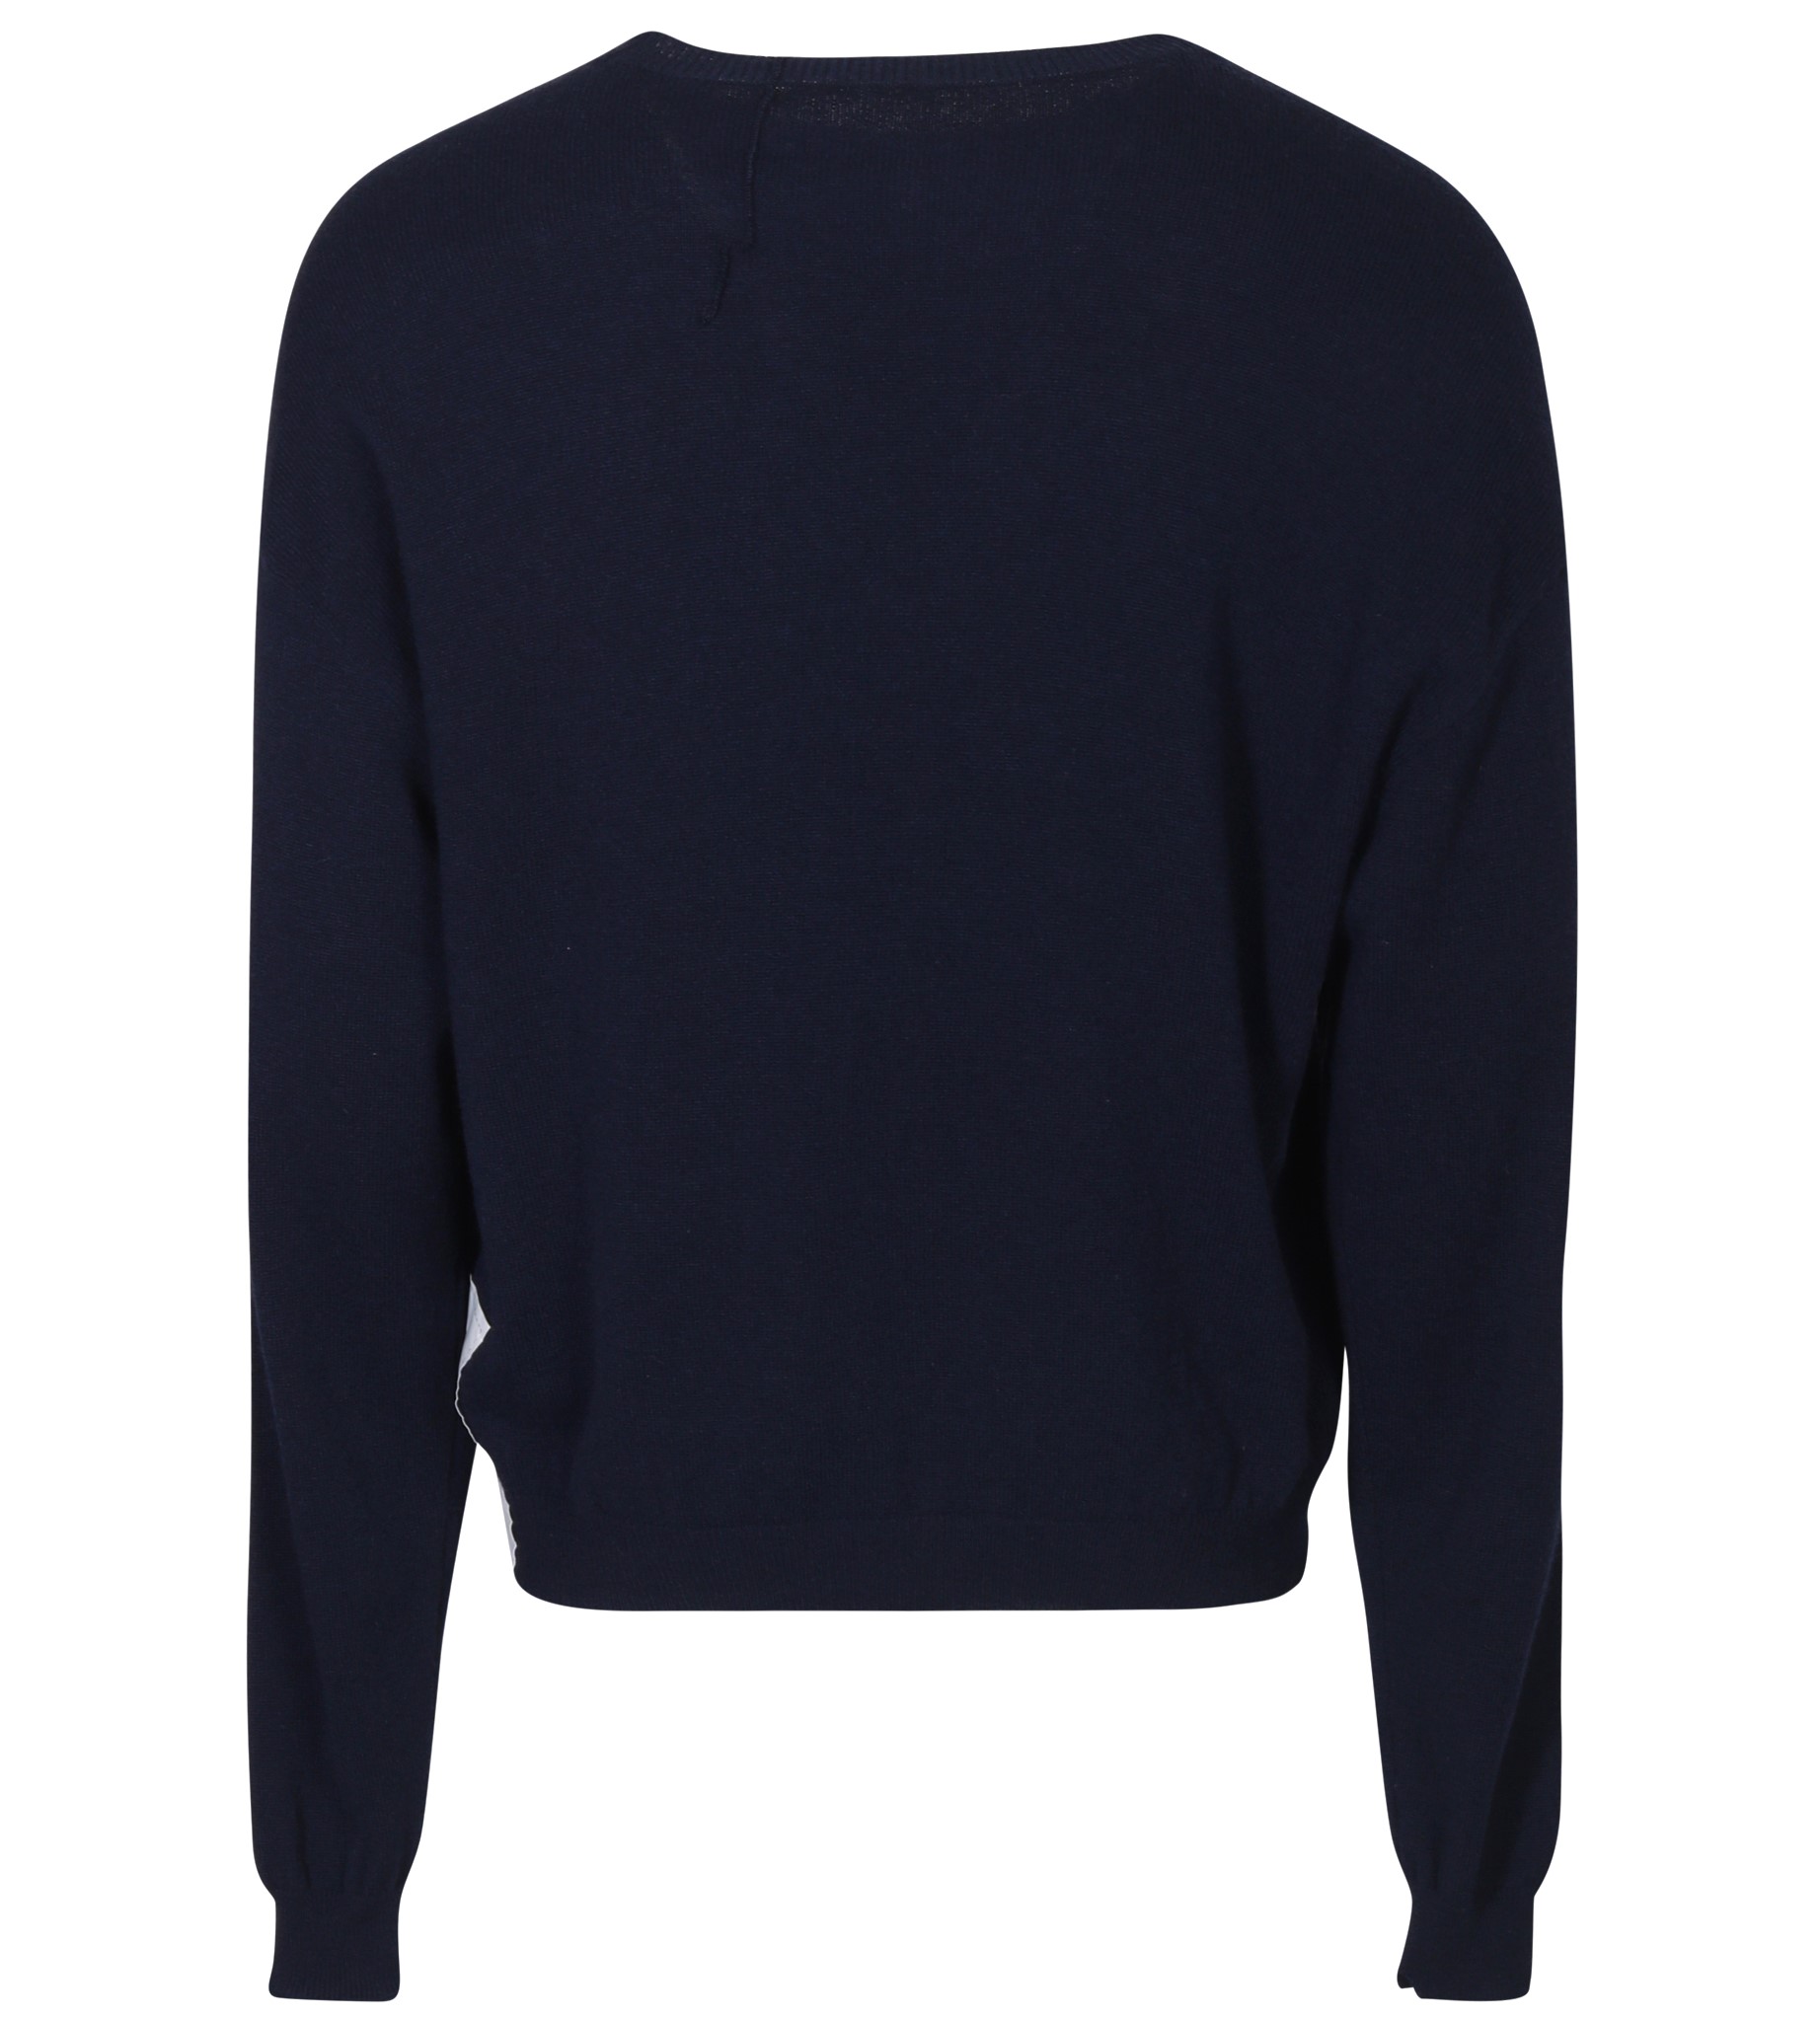 RAMAEL Infinity Cashmere Sweater in Navy XS